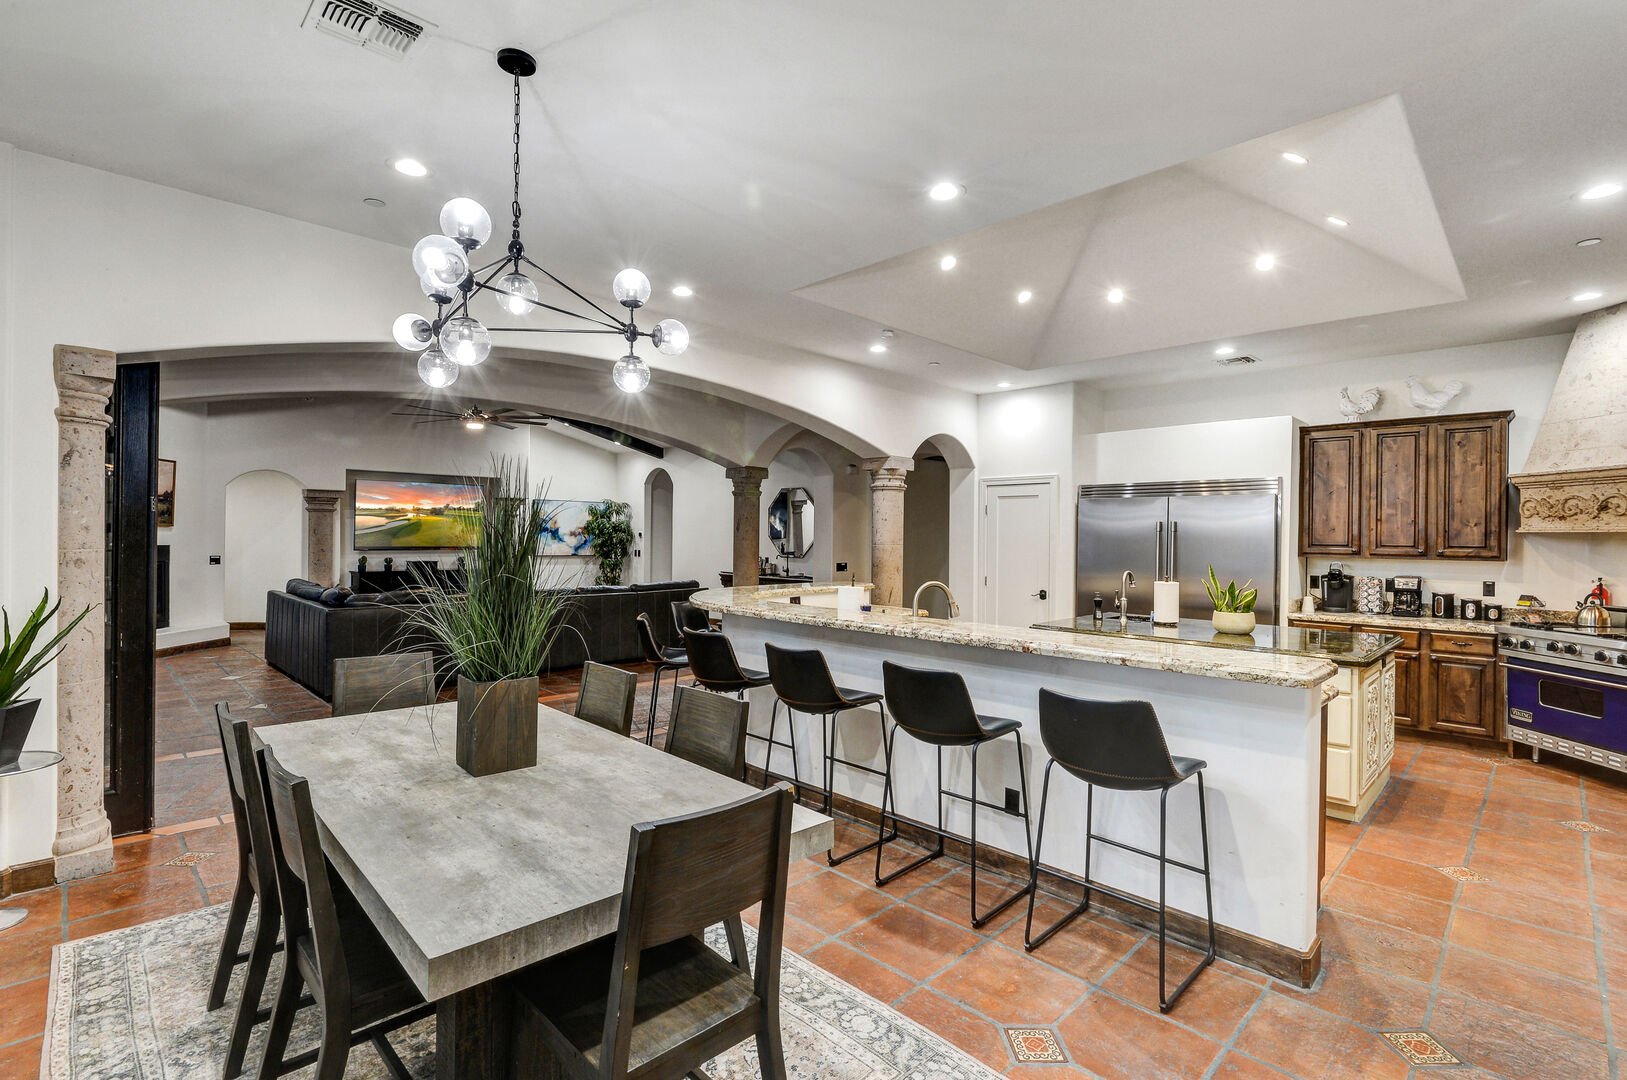 Experience the perfect harmony of the kitchen, dining room, and living room in Casa Palacio.